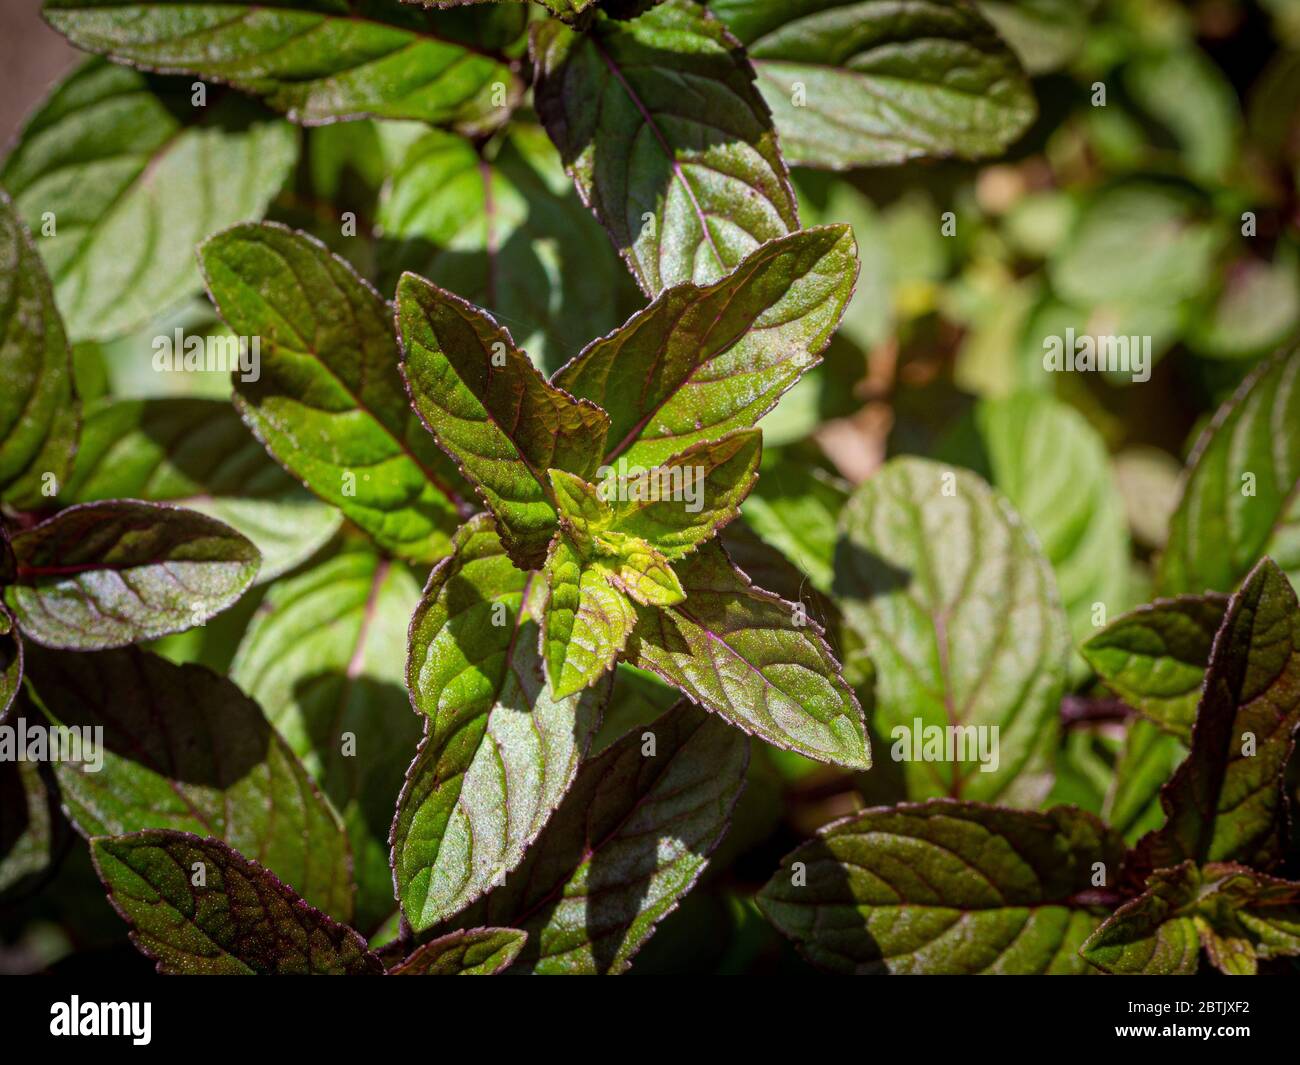 Chocolate Mint growing in a garden Stock Photo